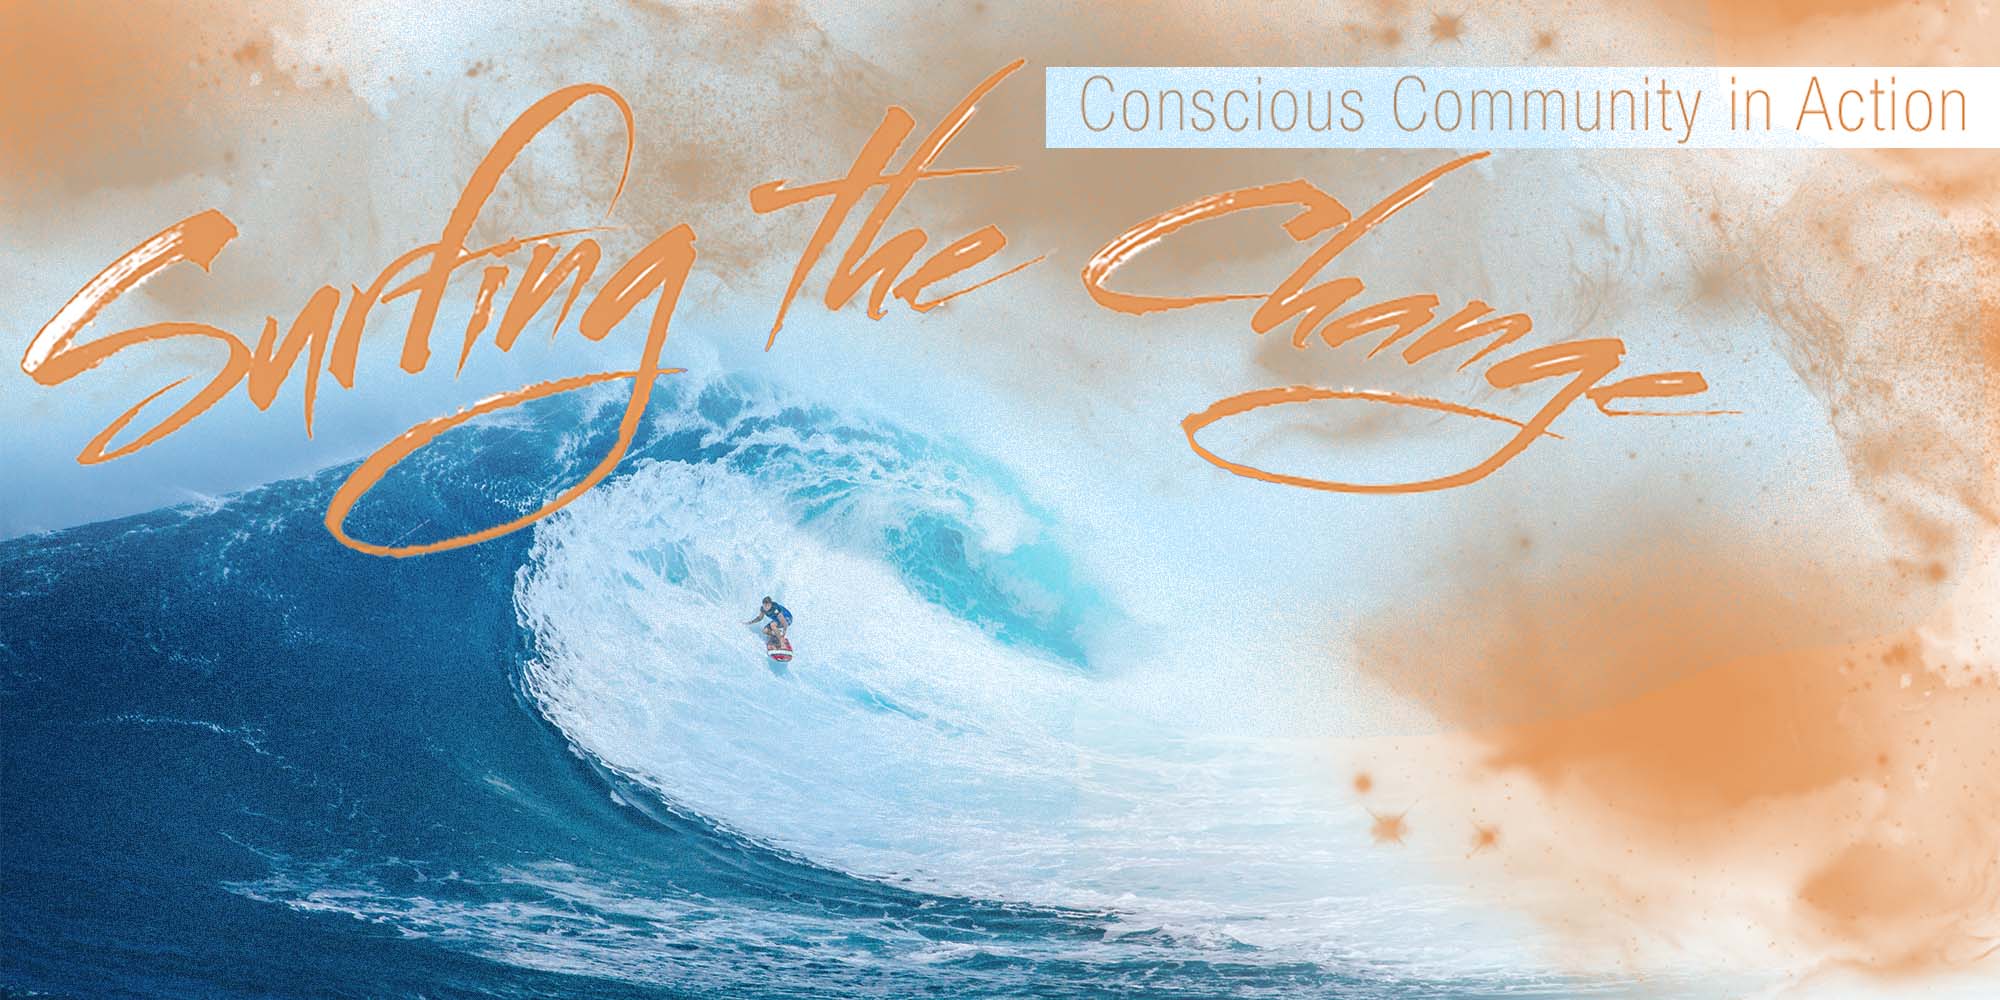 Surfing the Change - Conscious Community in Action